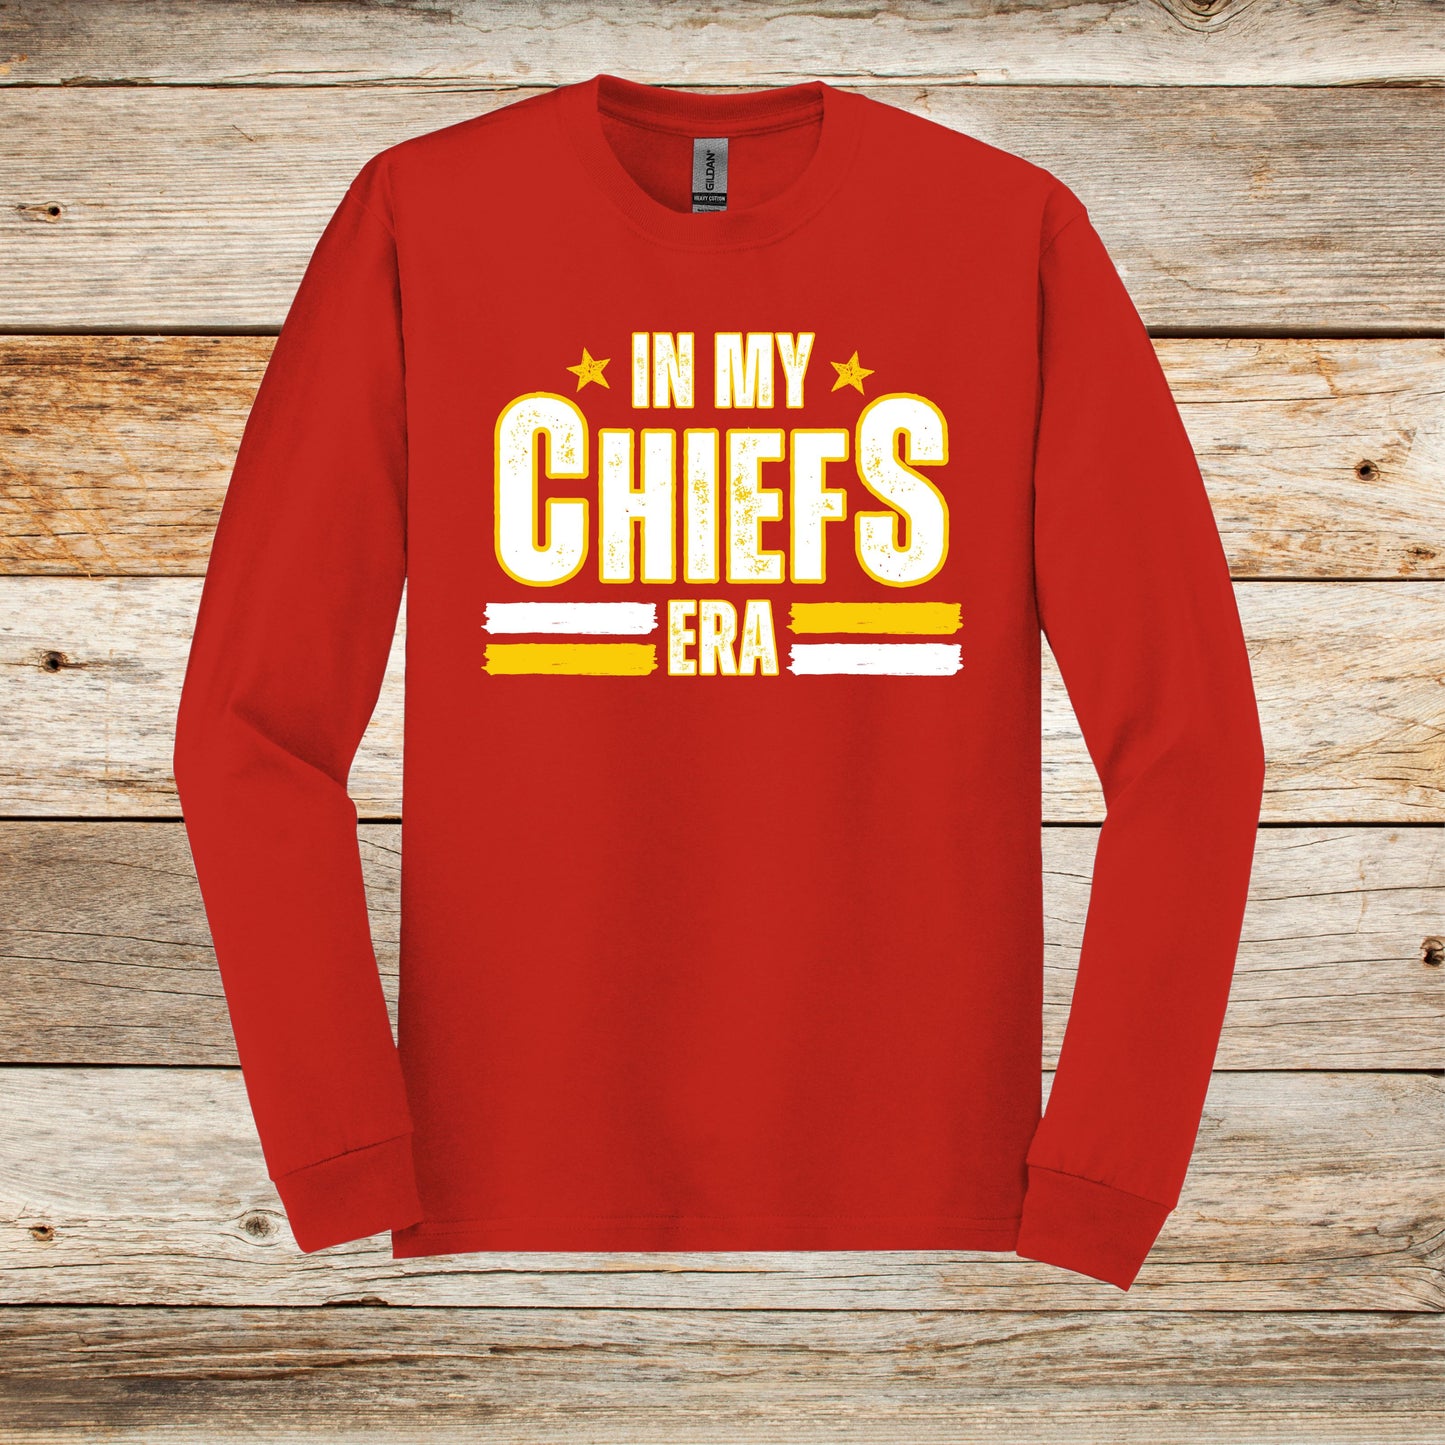 Football Long Sleeve T-Shirt - Chiefs Football - In My Chiefs Era- Adult and Children's Tee Shirts - Sports Long Sleeve T-Shirts Graphic Avenue Red Adult Small 